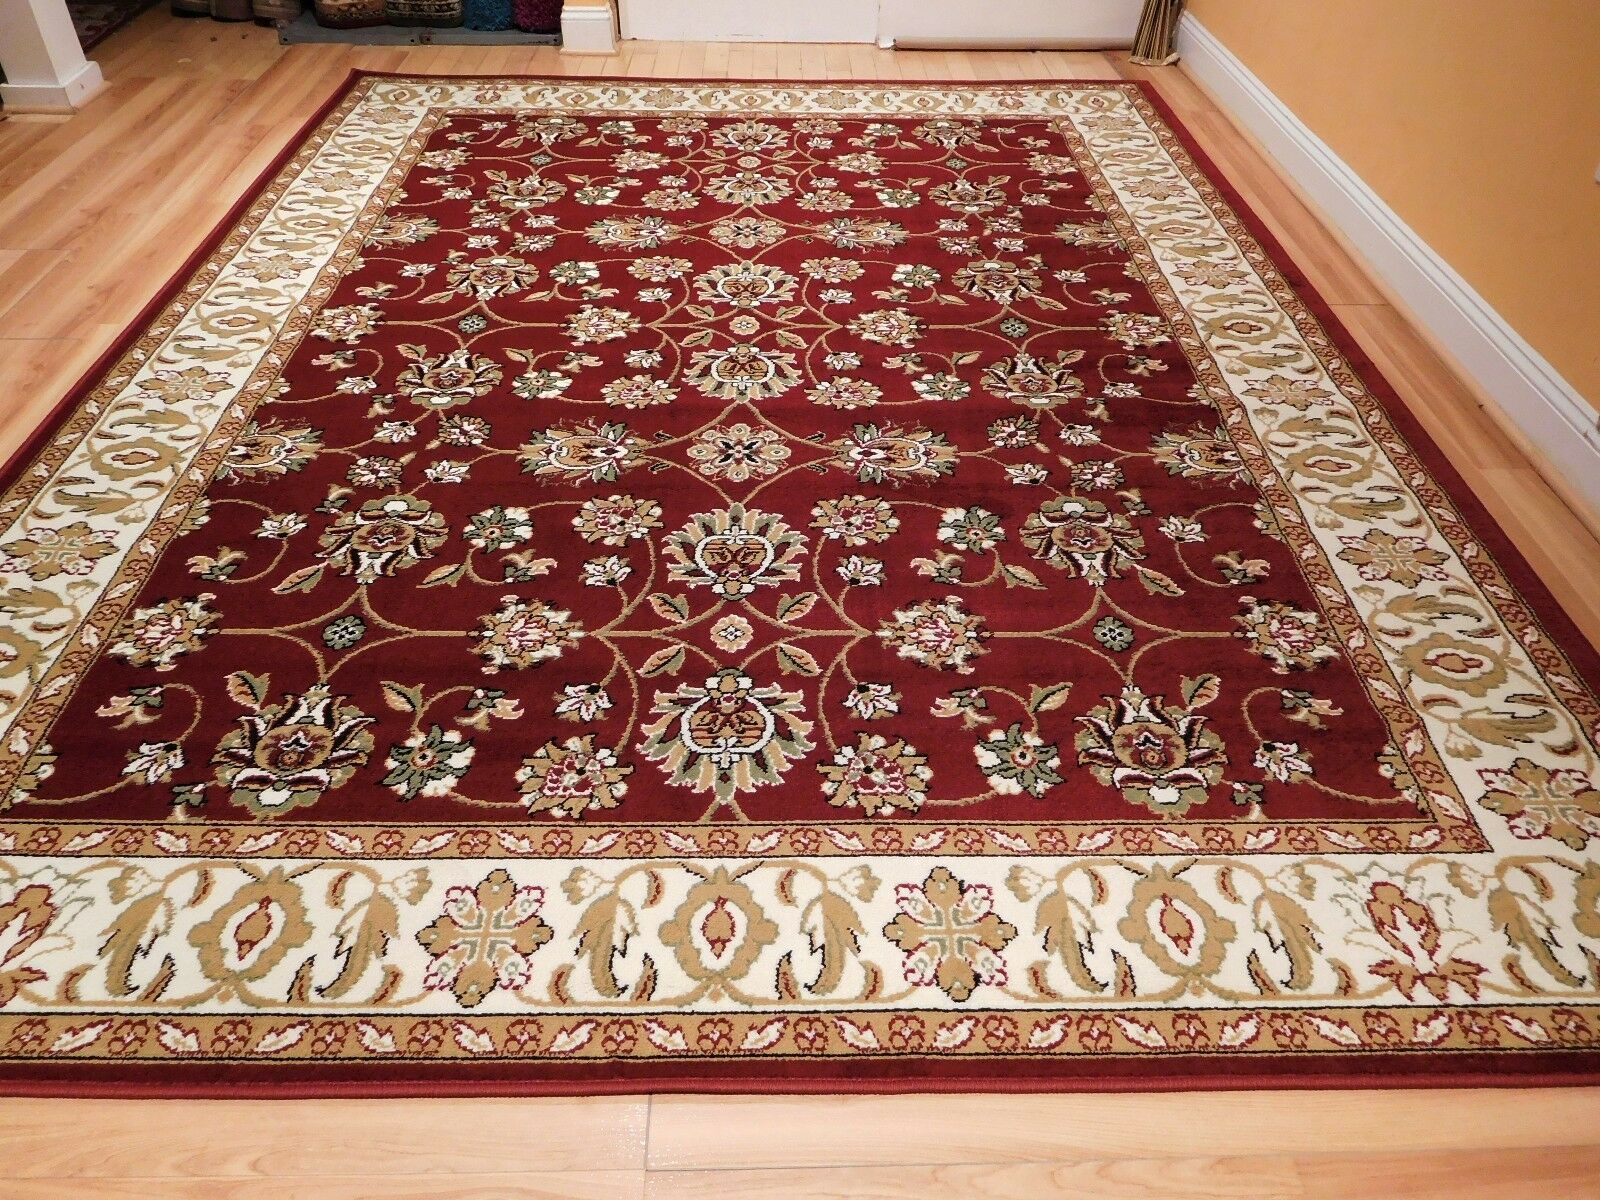 Large Traditional 8x11 Oriental Area Rug Area Rugs 5x8 Carpet 2x3 Living Room